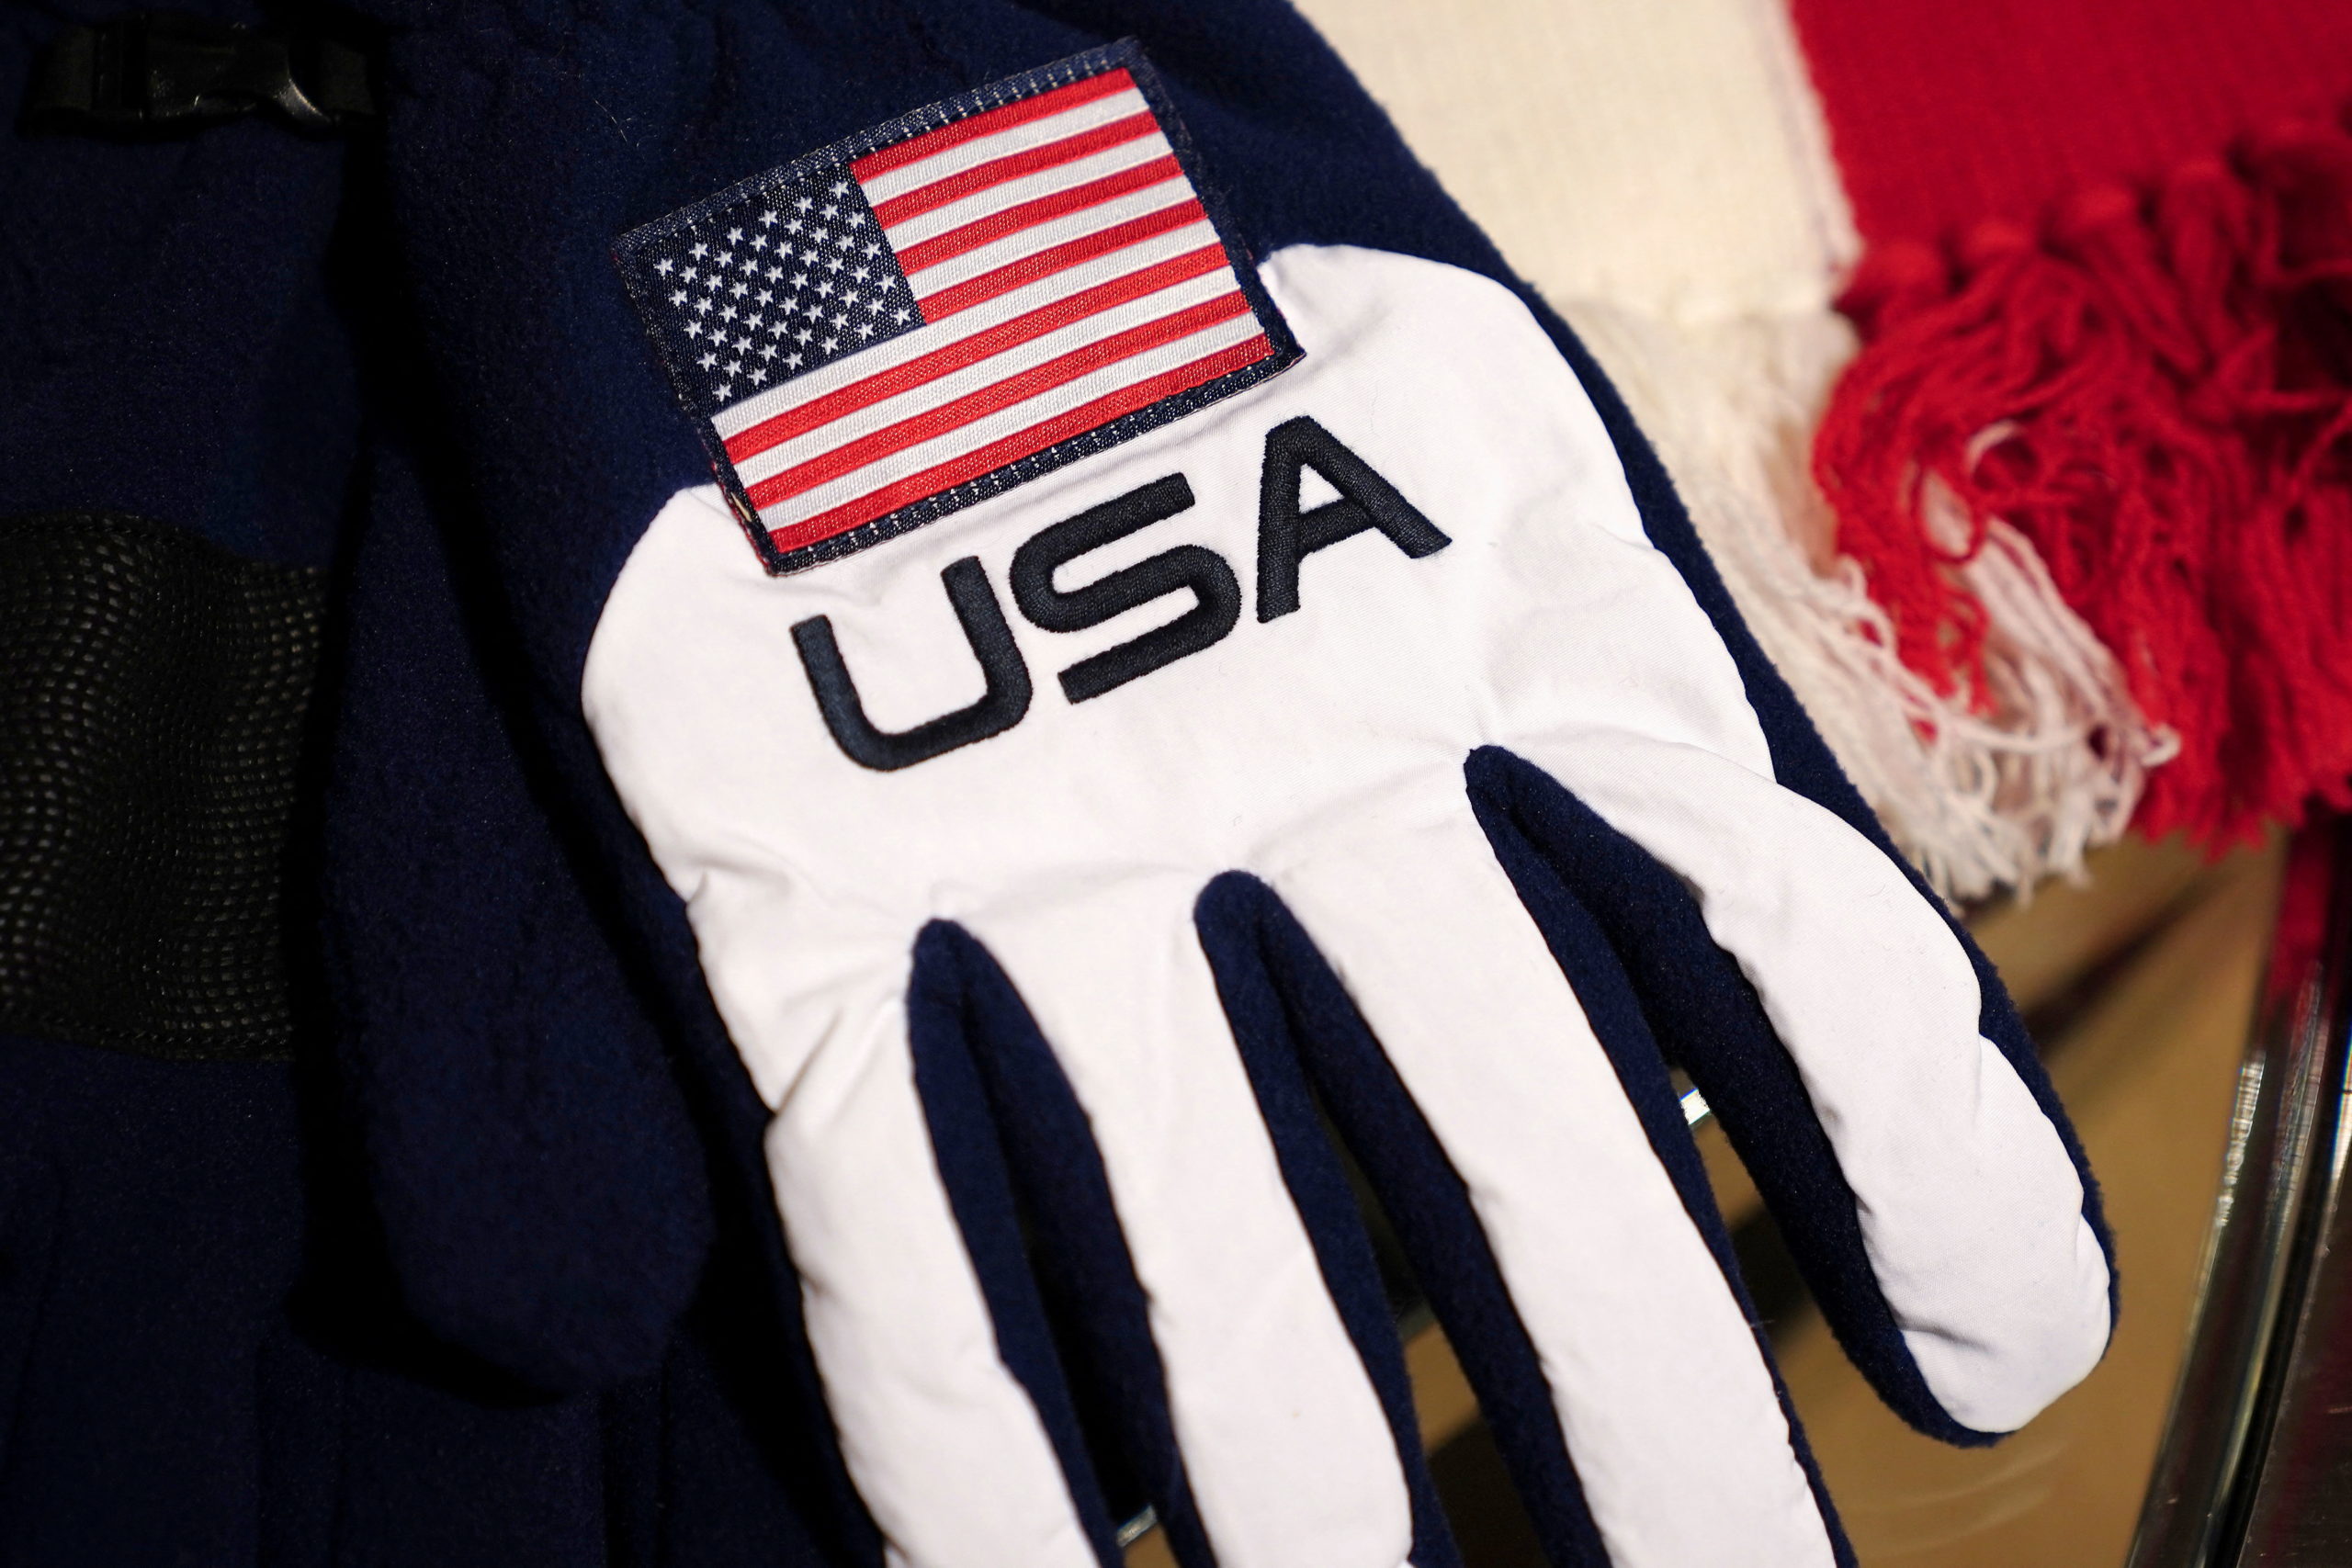 U.S. Winter Olympic Ralph Lauren Polo attire items are pictured in the Manhattan borough of New York City, New York, U.S., October 28, 2021.